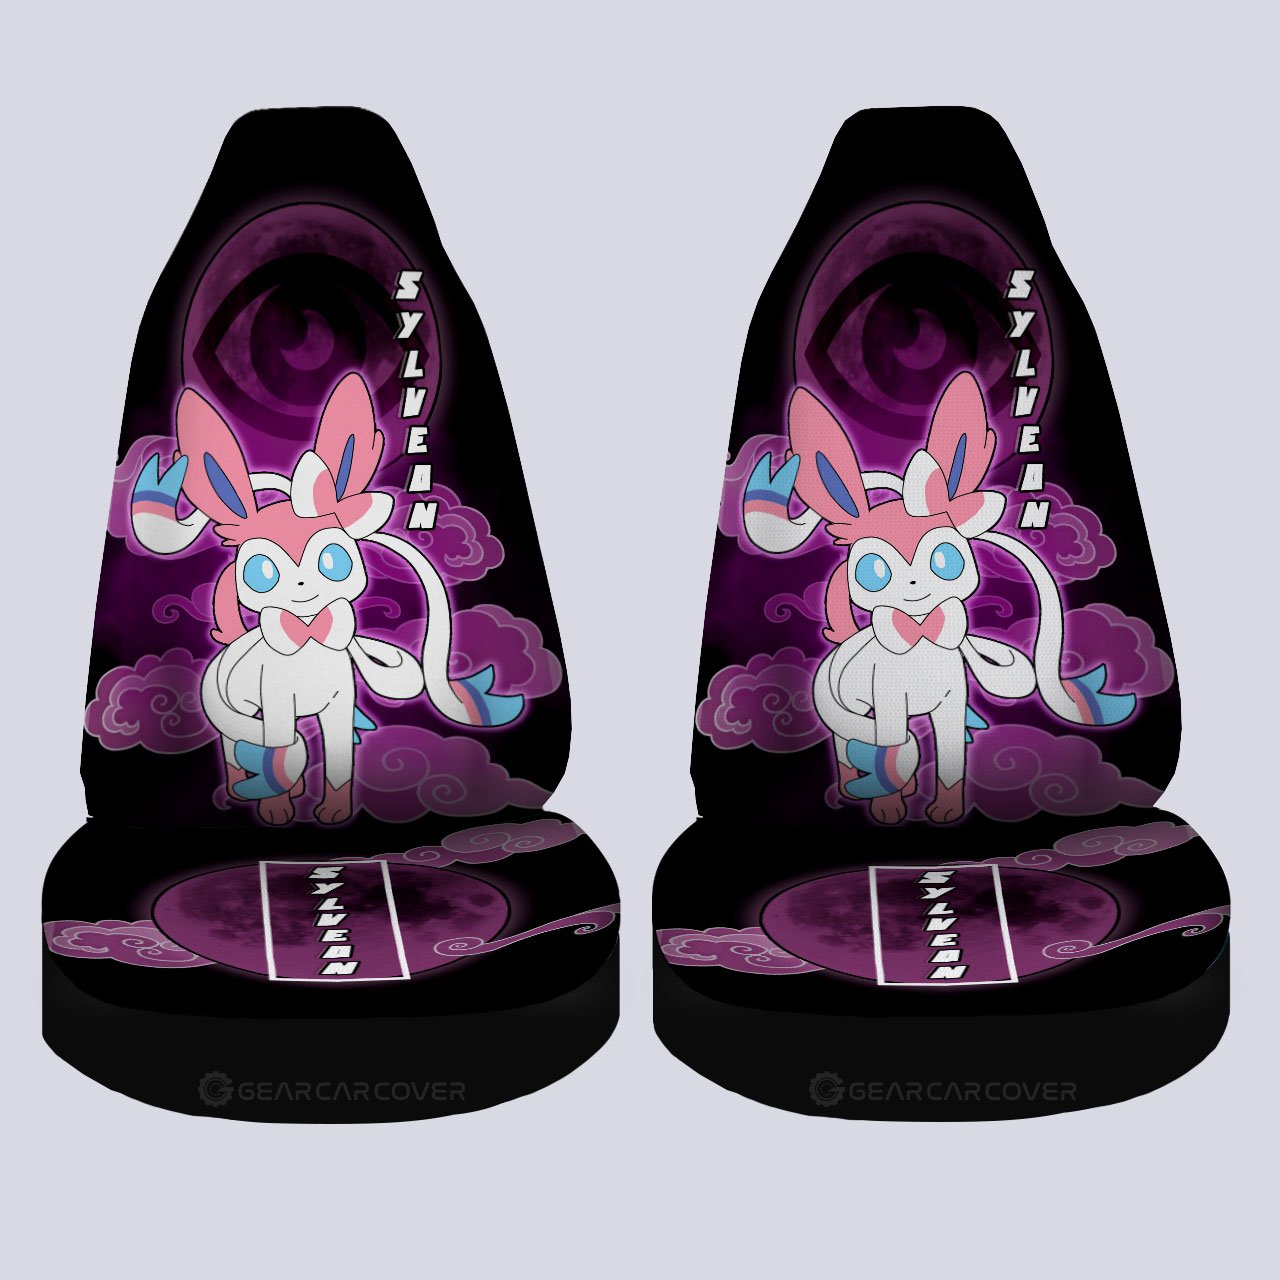 Sylveon Car Seat Covers Custom Anime Car Accessories For Anime Fans - Gearcarcover - 4